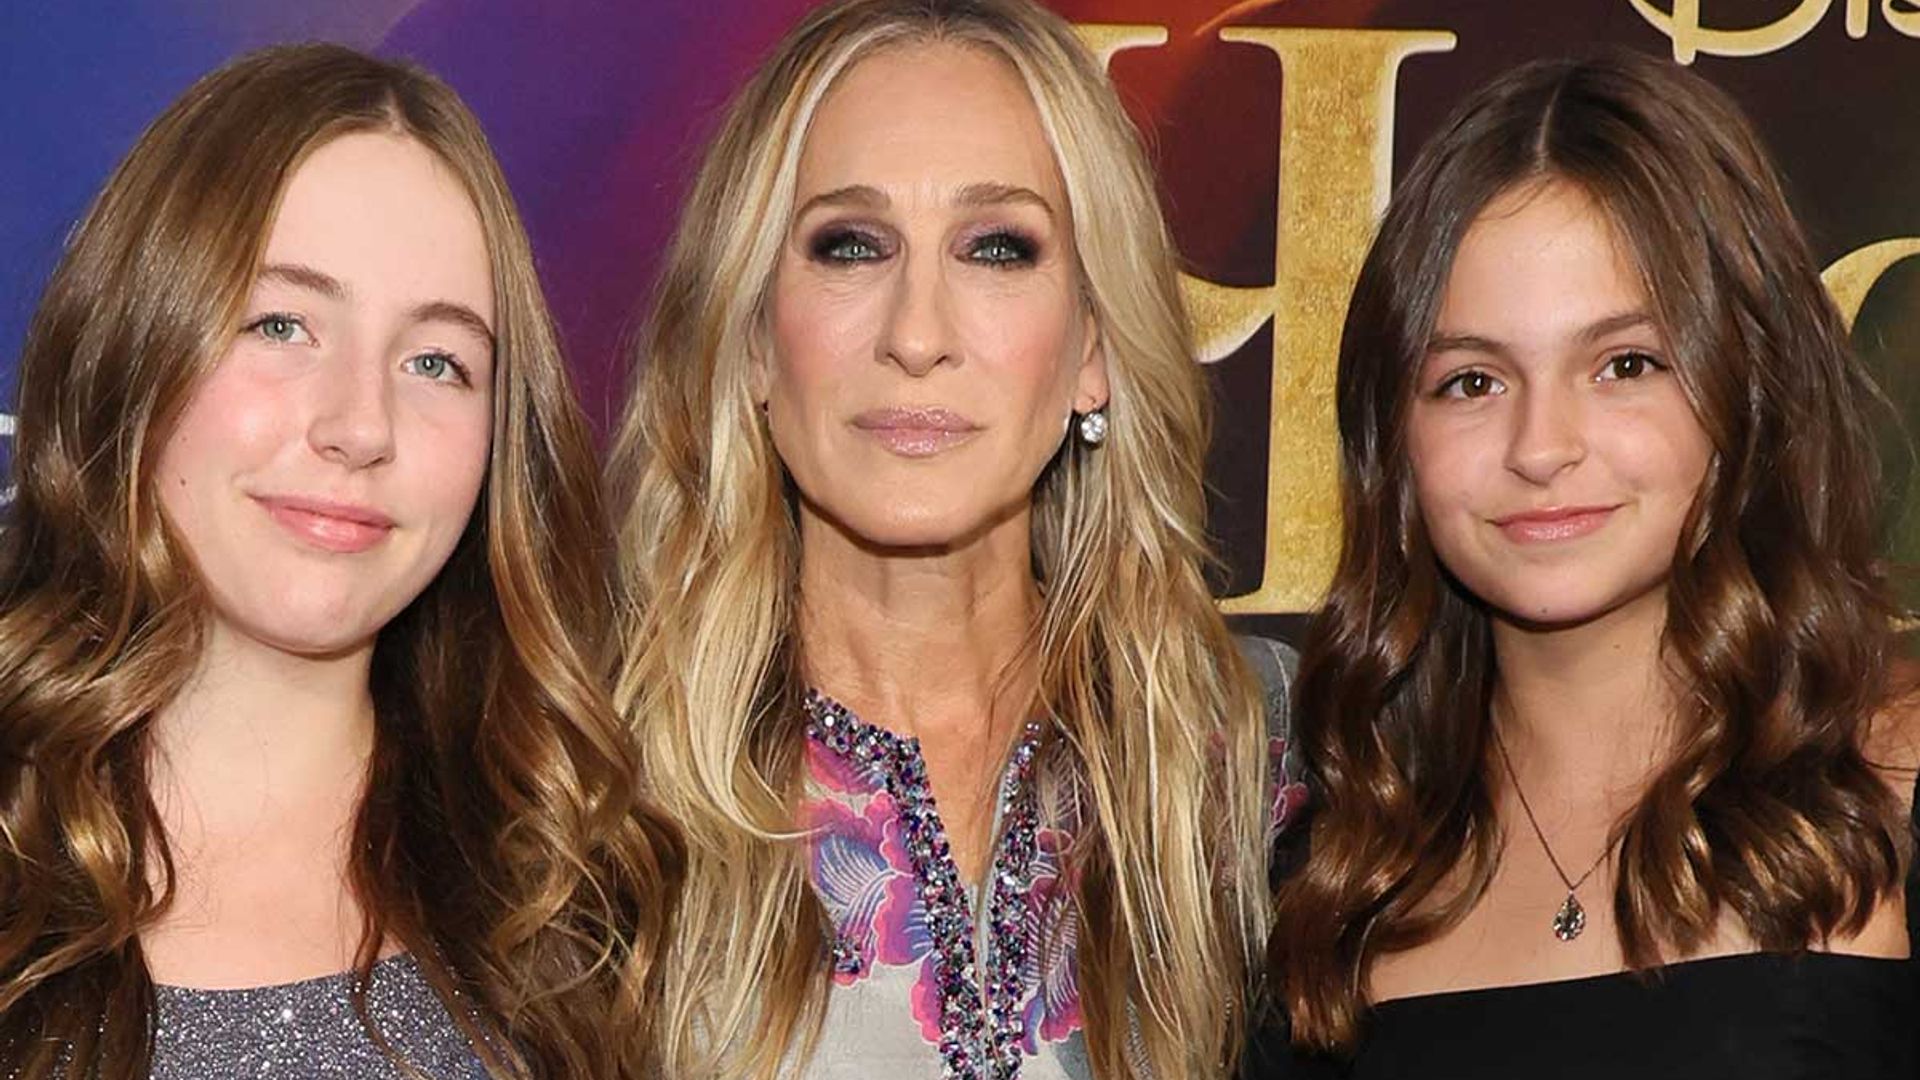 Sarah Jessica Parker supported by lookalike twin daughters in